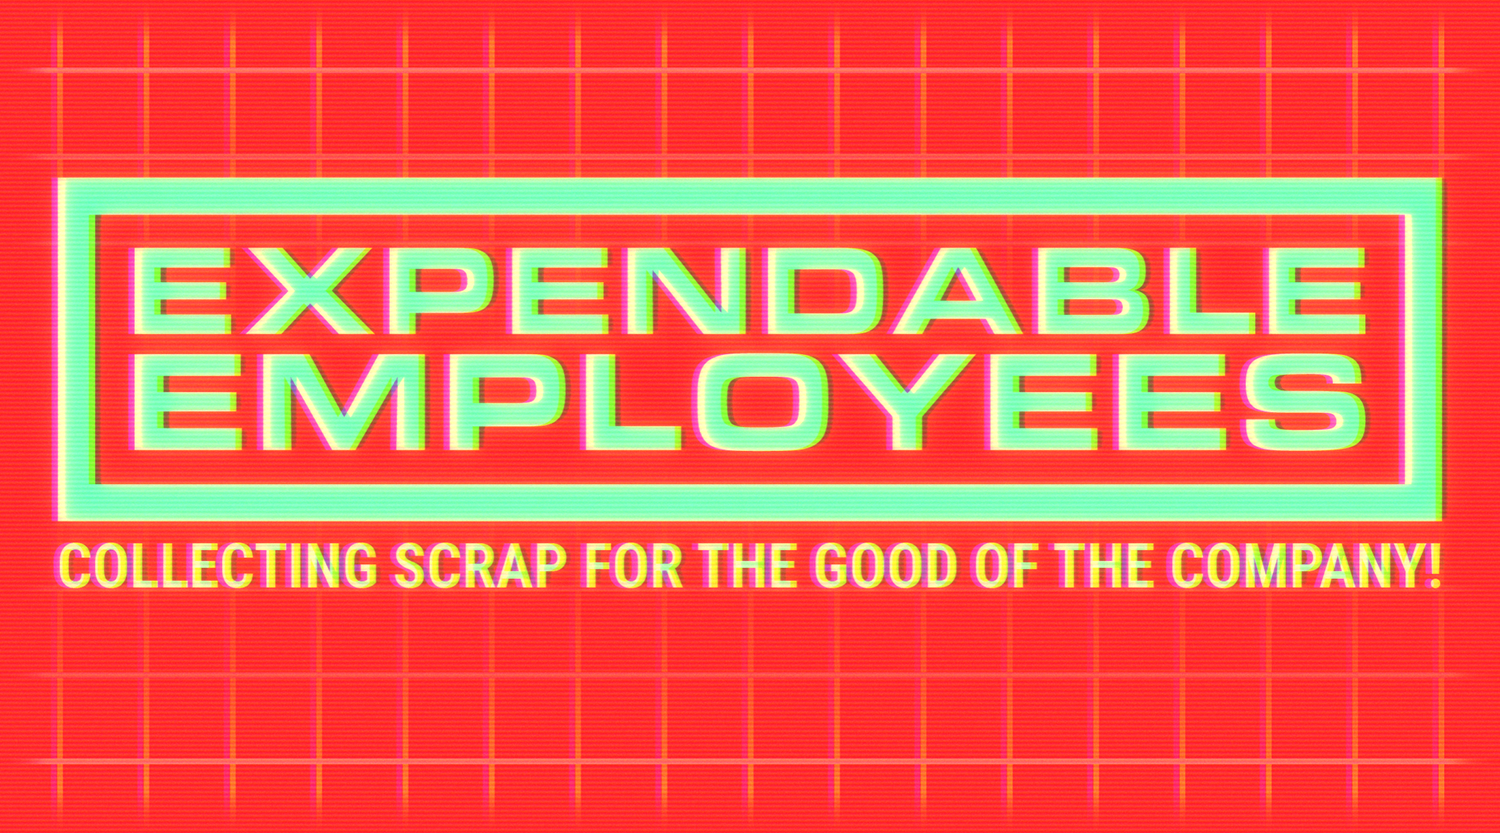 EXPENDABLE EMPLOYEES